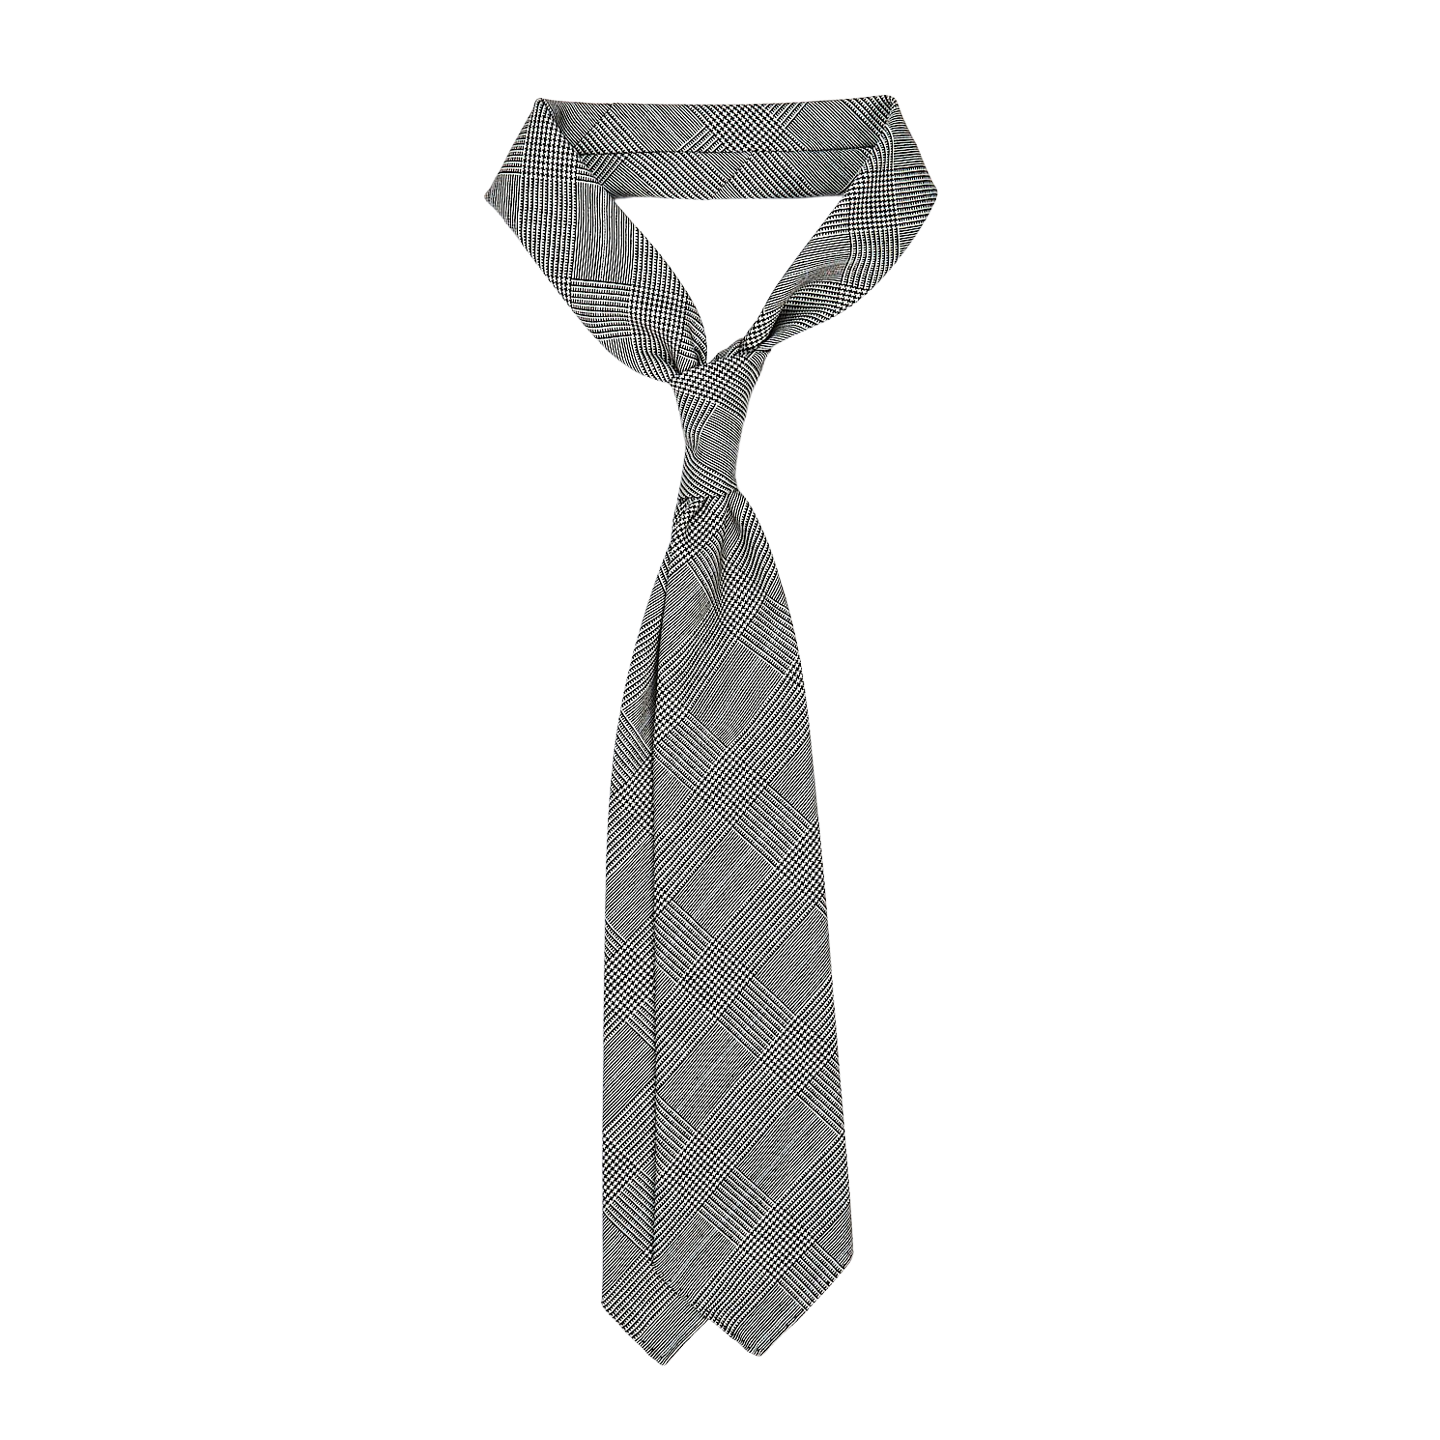 Dreaming of Monday Dreaming of Monday Blue Glen Plaid 7-Fold High Twist Wool Tie Back Feature